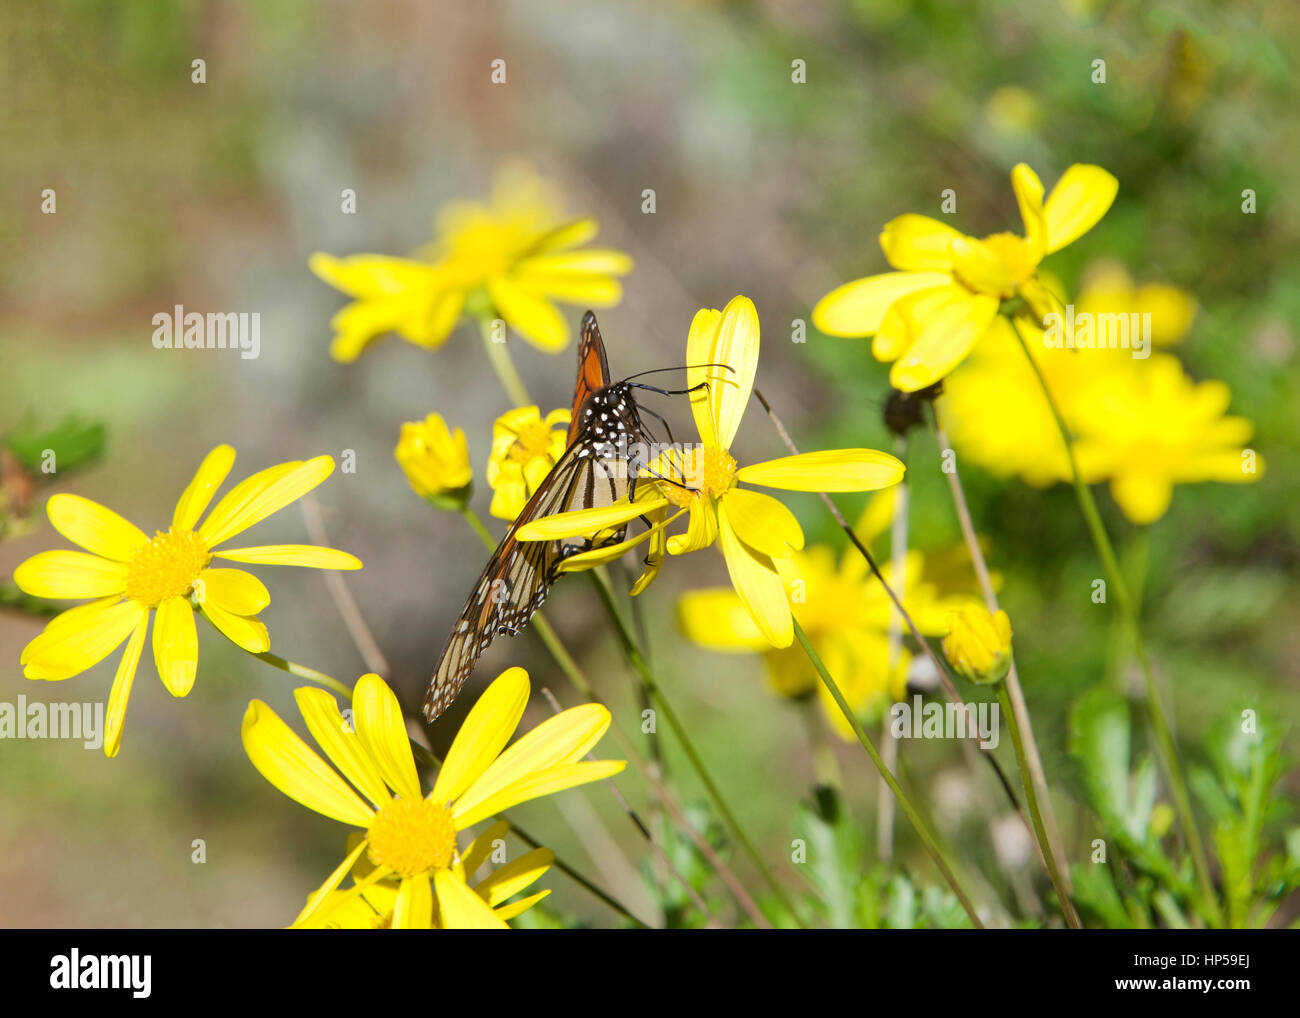 Monarch butterfly on yellow daisy flowers, the monarch butterfly is possibly the most familiar North American butterfly Stock Photo